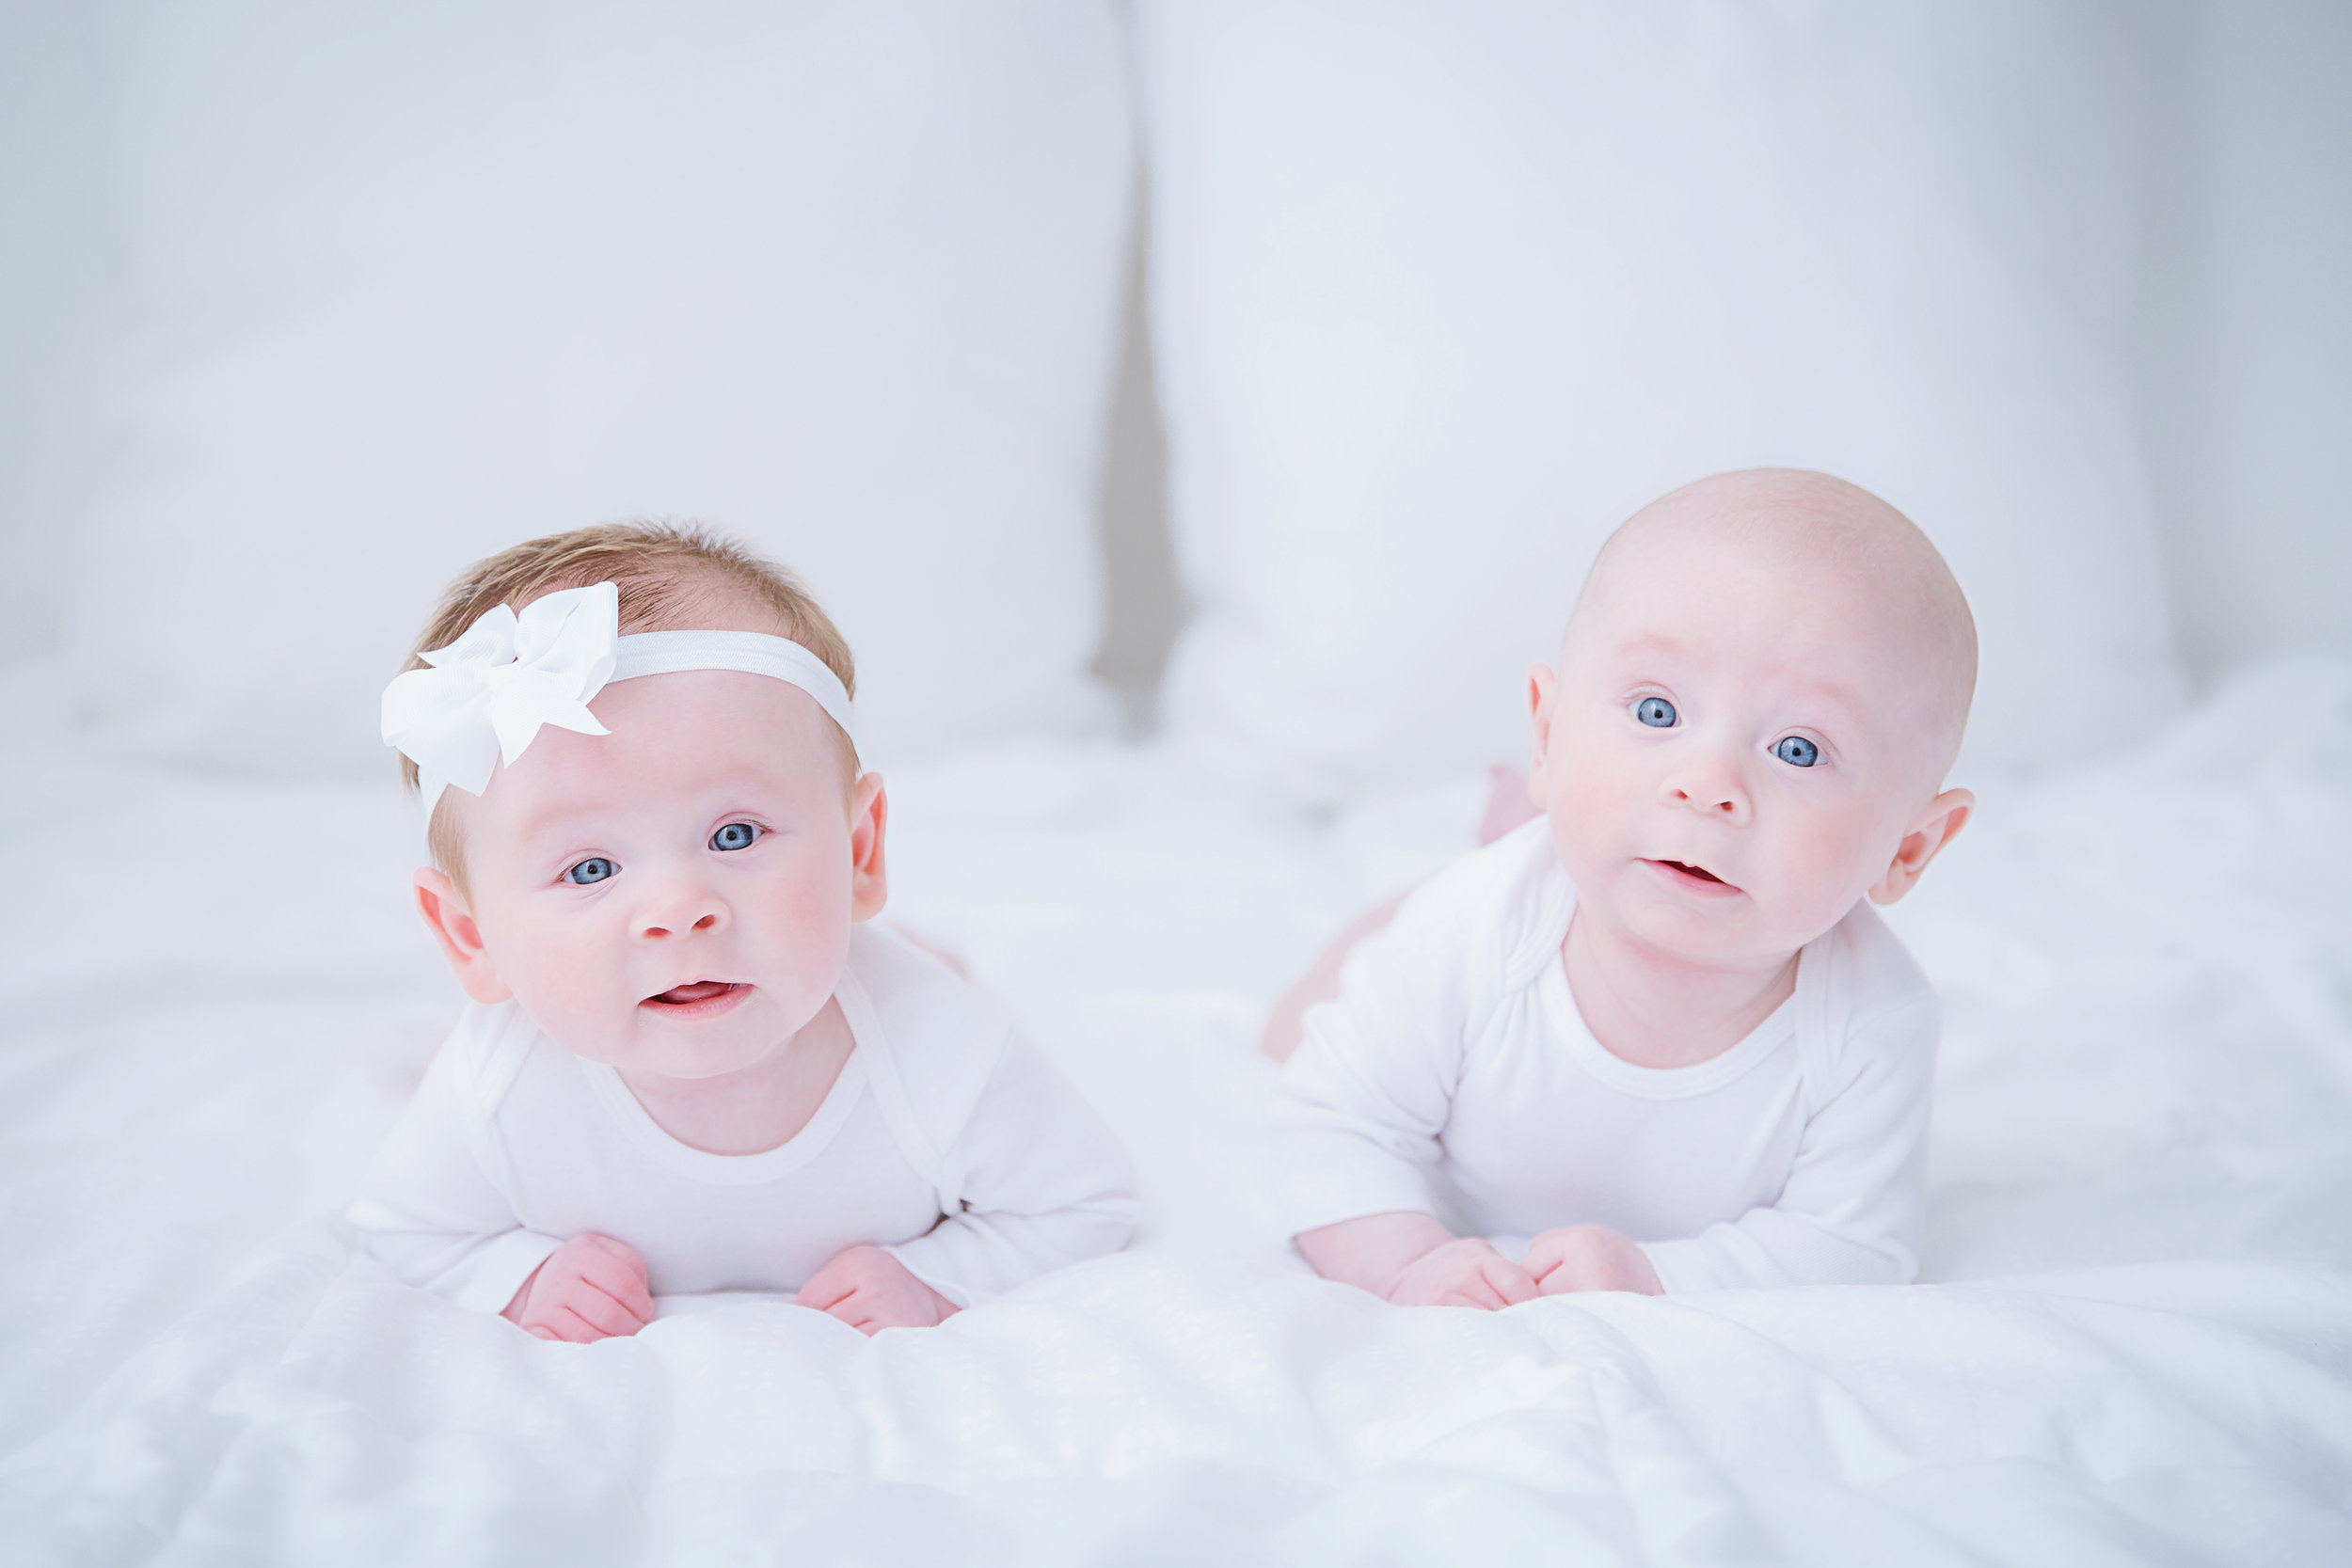 three-month-old-twin-boy-and-girl-wearing-white-and-pushing-up-in-burlington-southern-new-jersey-photo-studio